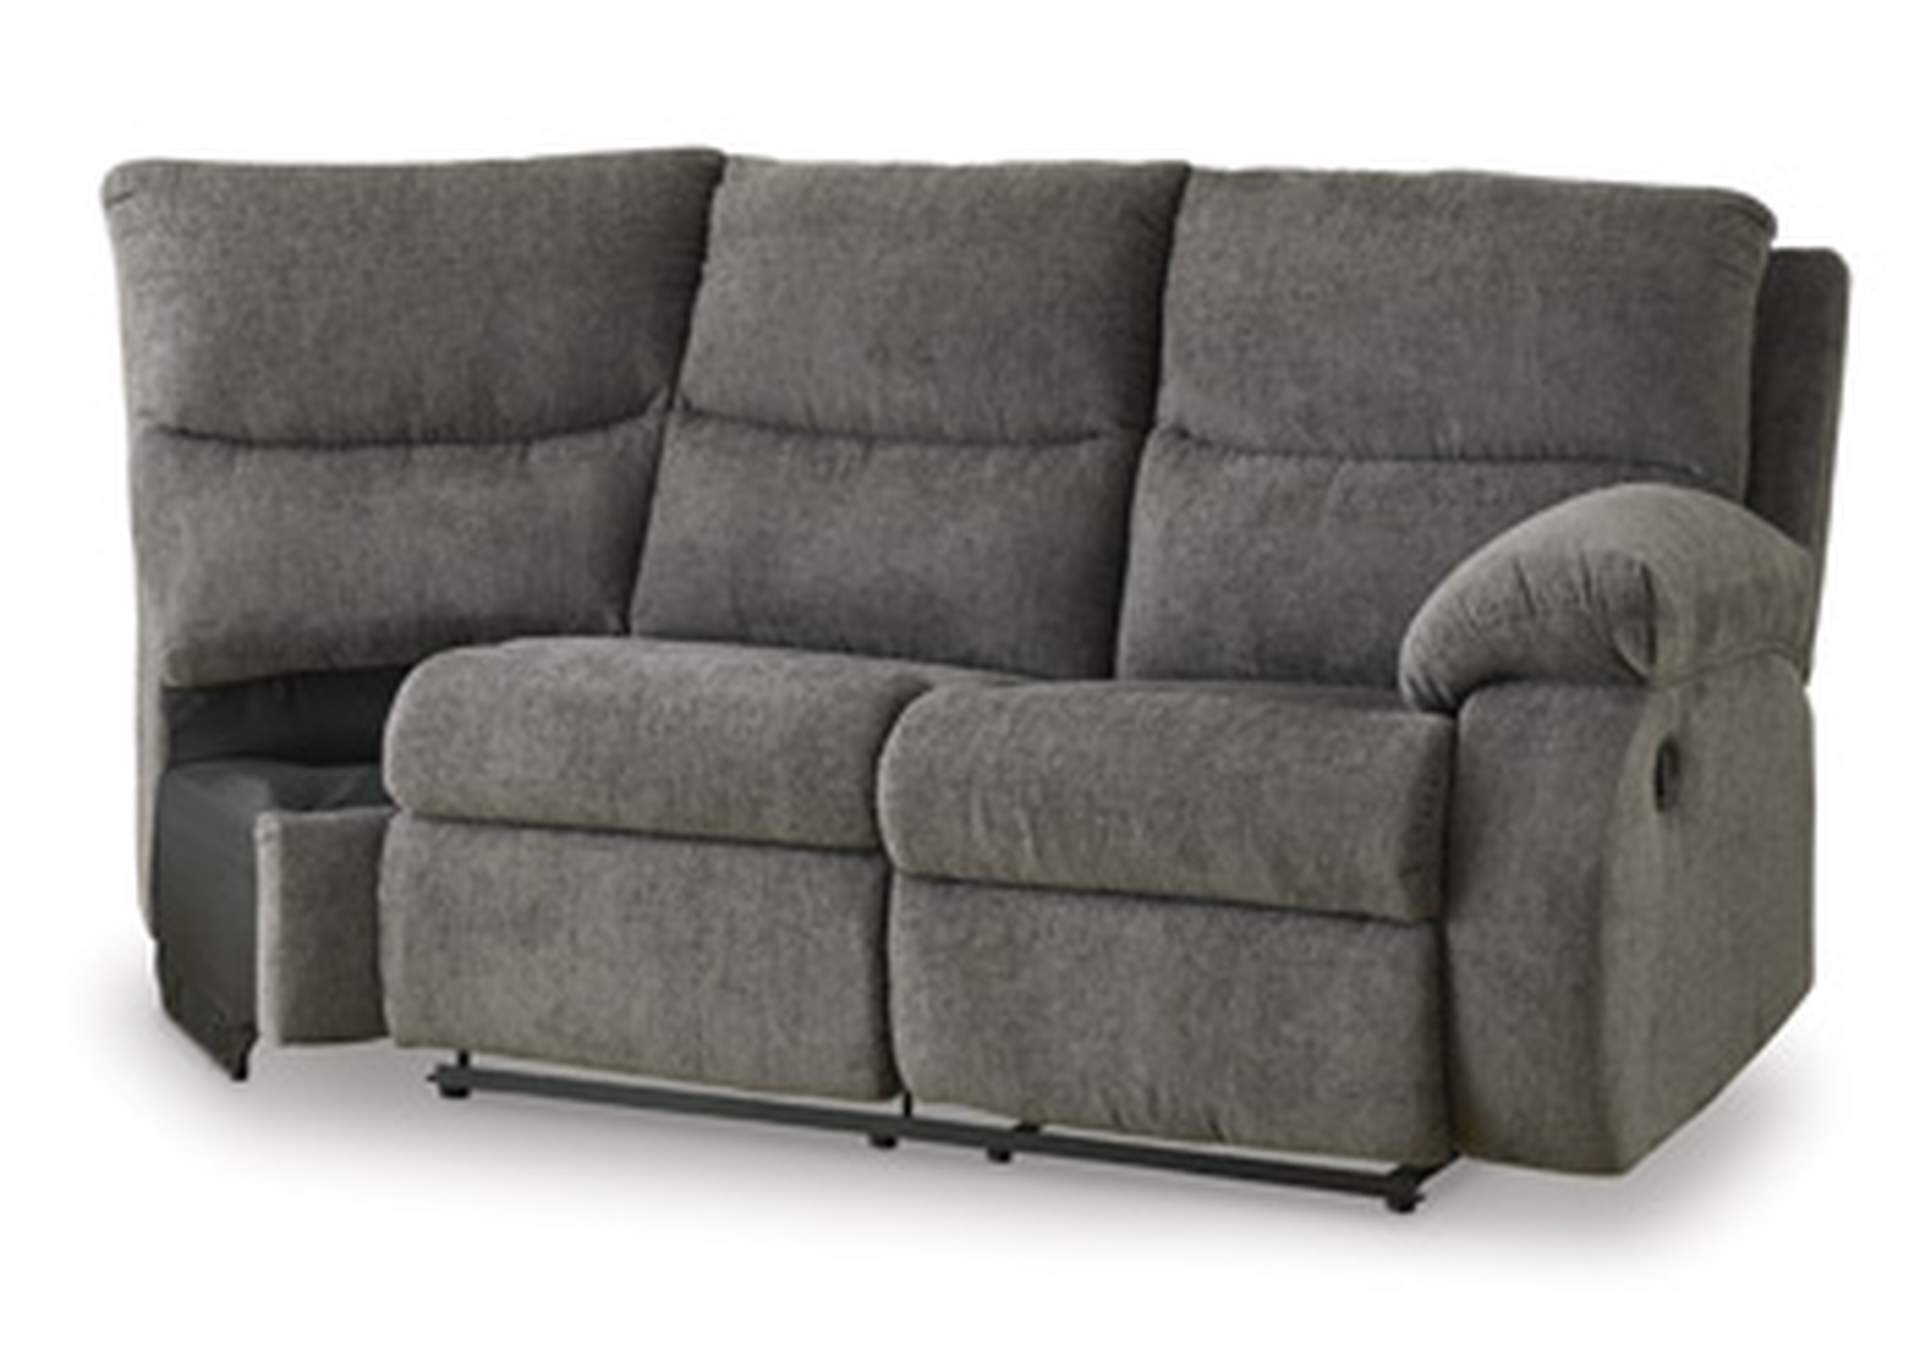 Museum Right-Arm Facing Reclining Loveseat,Signature Design By Ashley